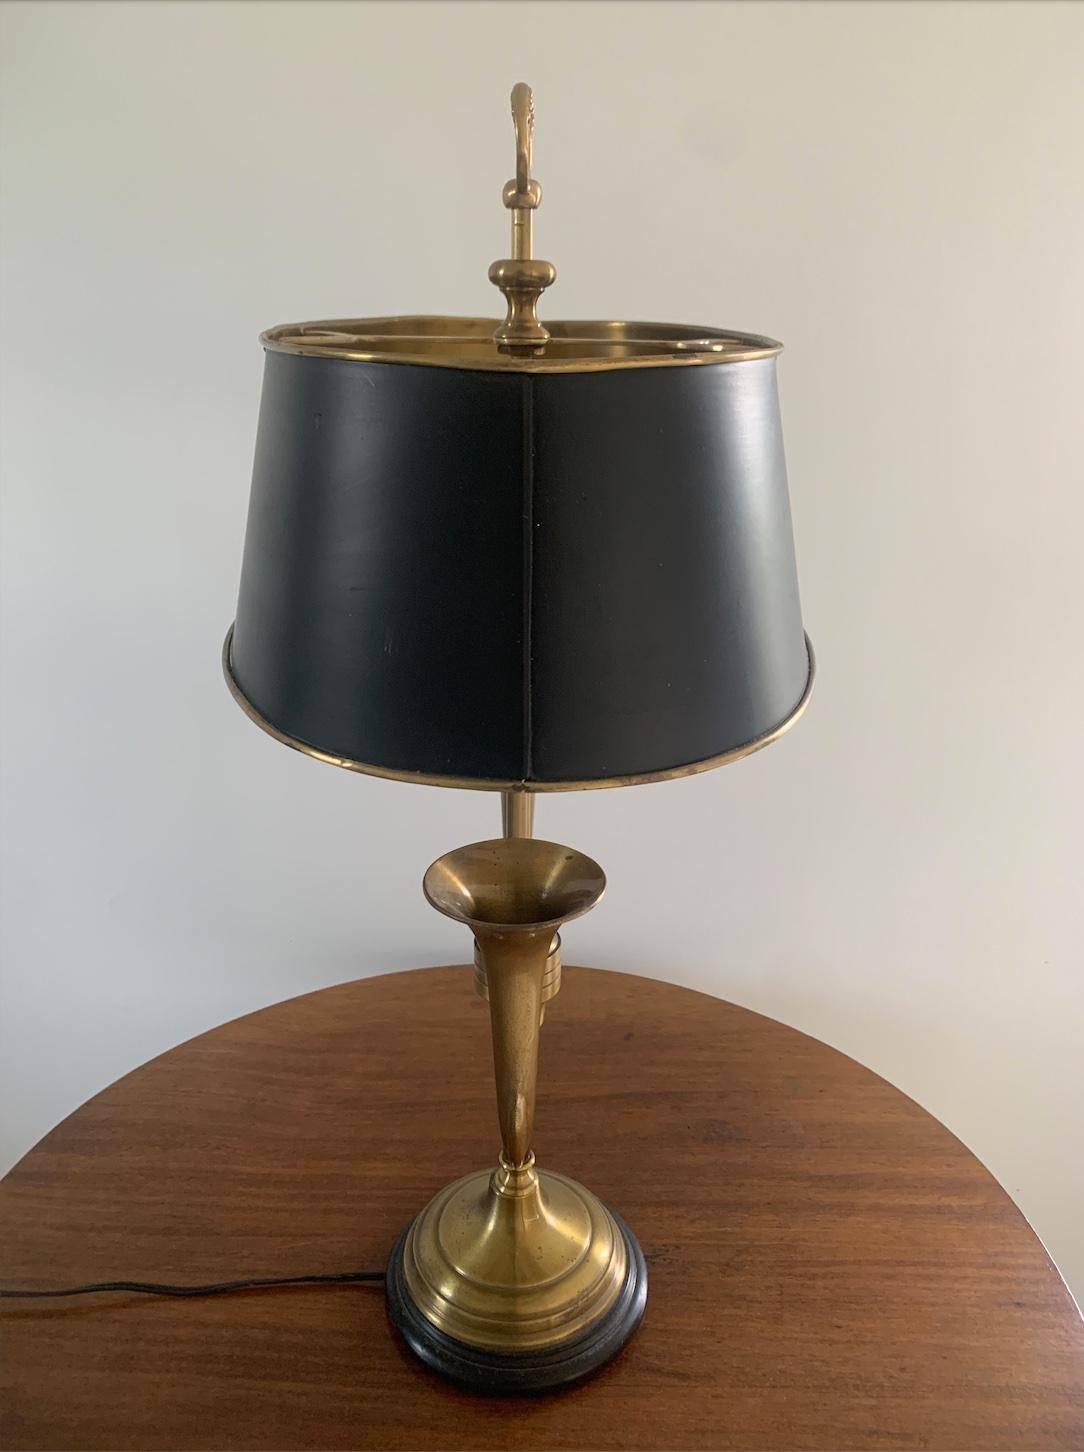 British Colonial Mid-20th Century Brass Horn Bouillotte Lamp with Black Tole Shade For Sale